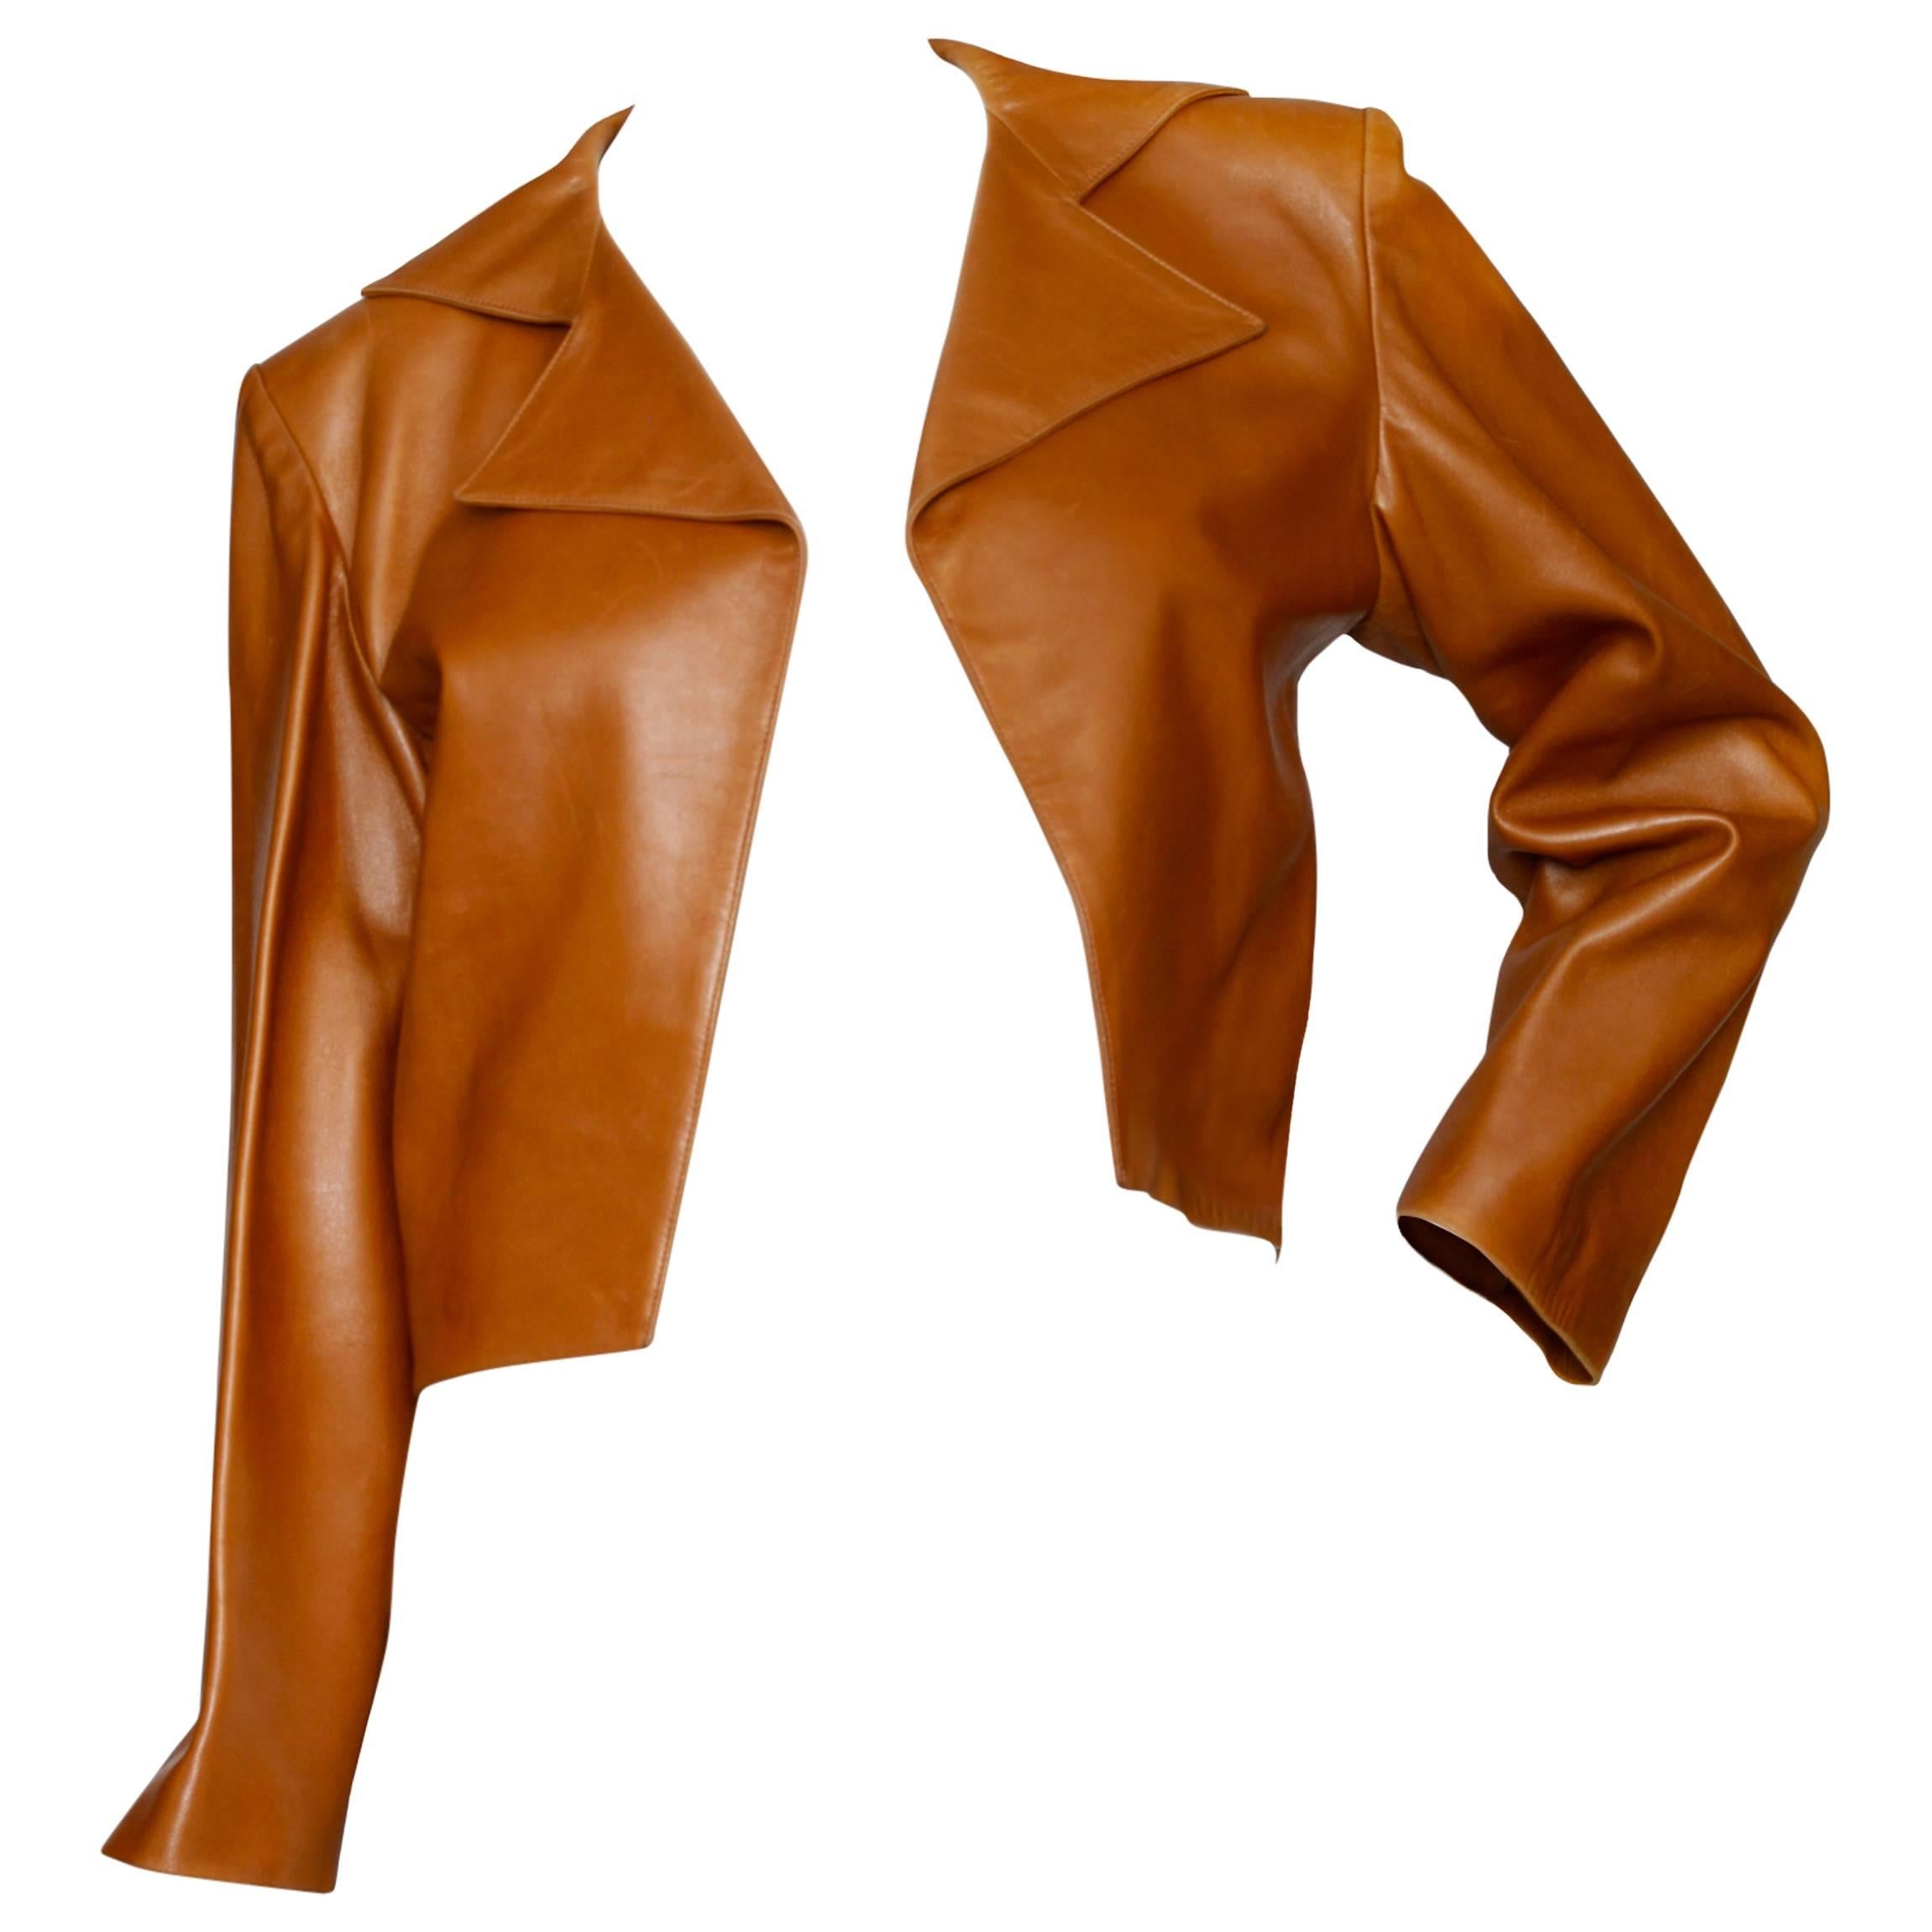 80s Yves Saint Laurent Brandy Colored Cropped Leather Jacket